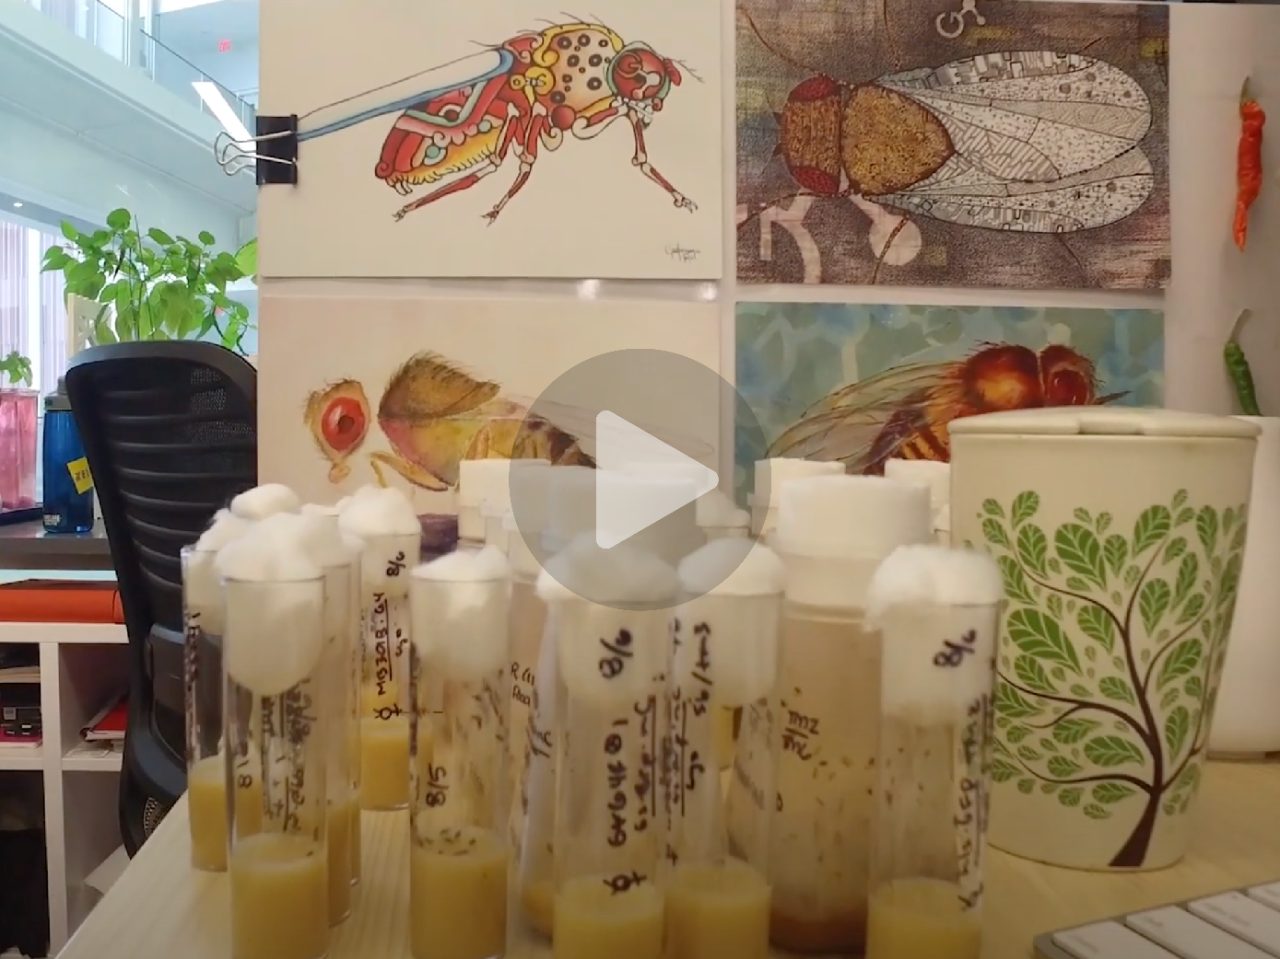 Fruit fly art and vials